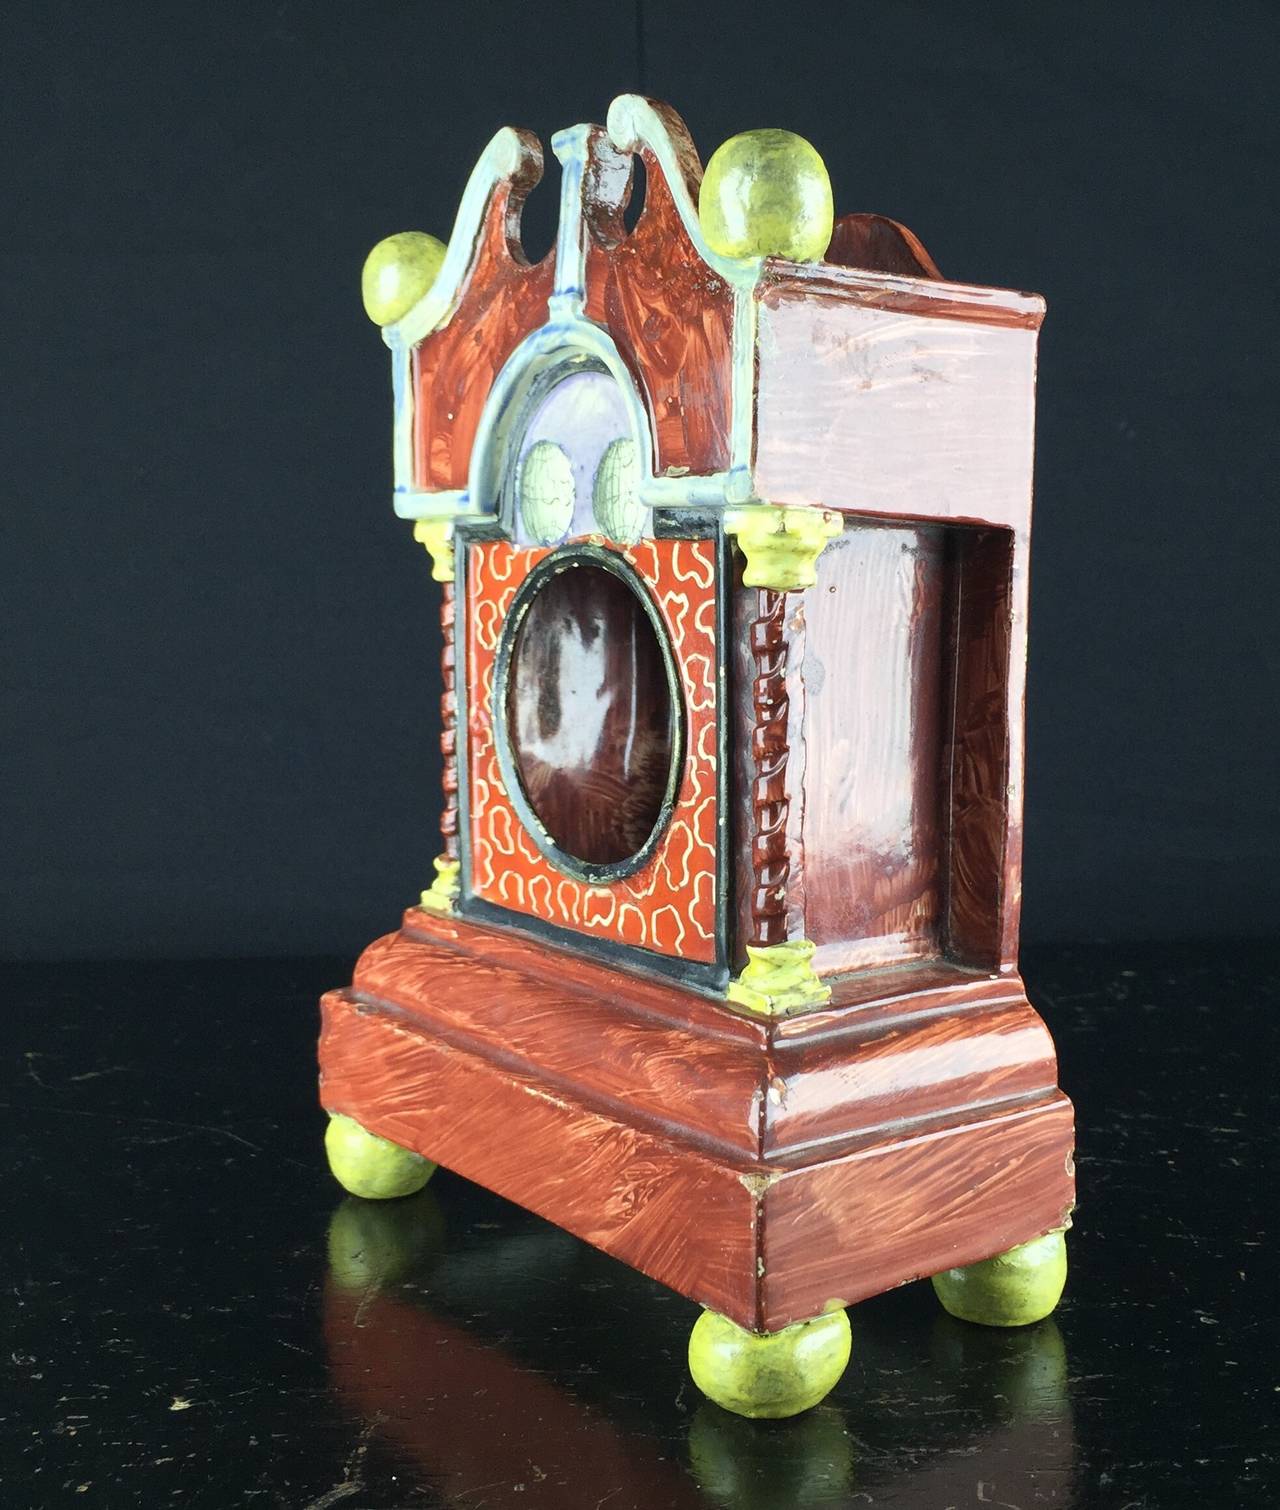 Staffordshire Pearlware model of a bracket clock, on a plinth base with ball feet, the face decorated with world globes, the broken pediment supported by moulded pillars, with open circular hole to display a pocket watch, a smaller hole and three